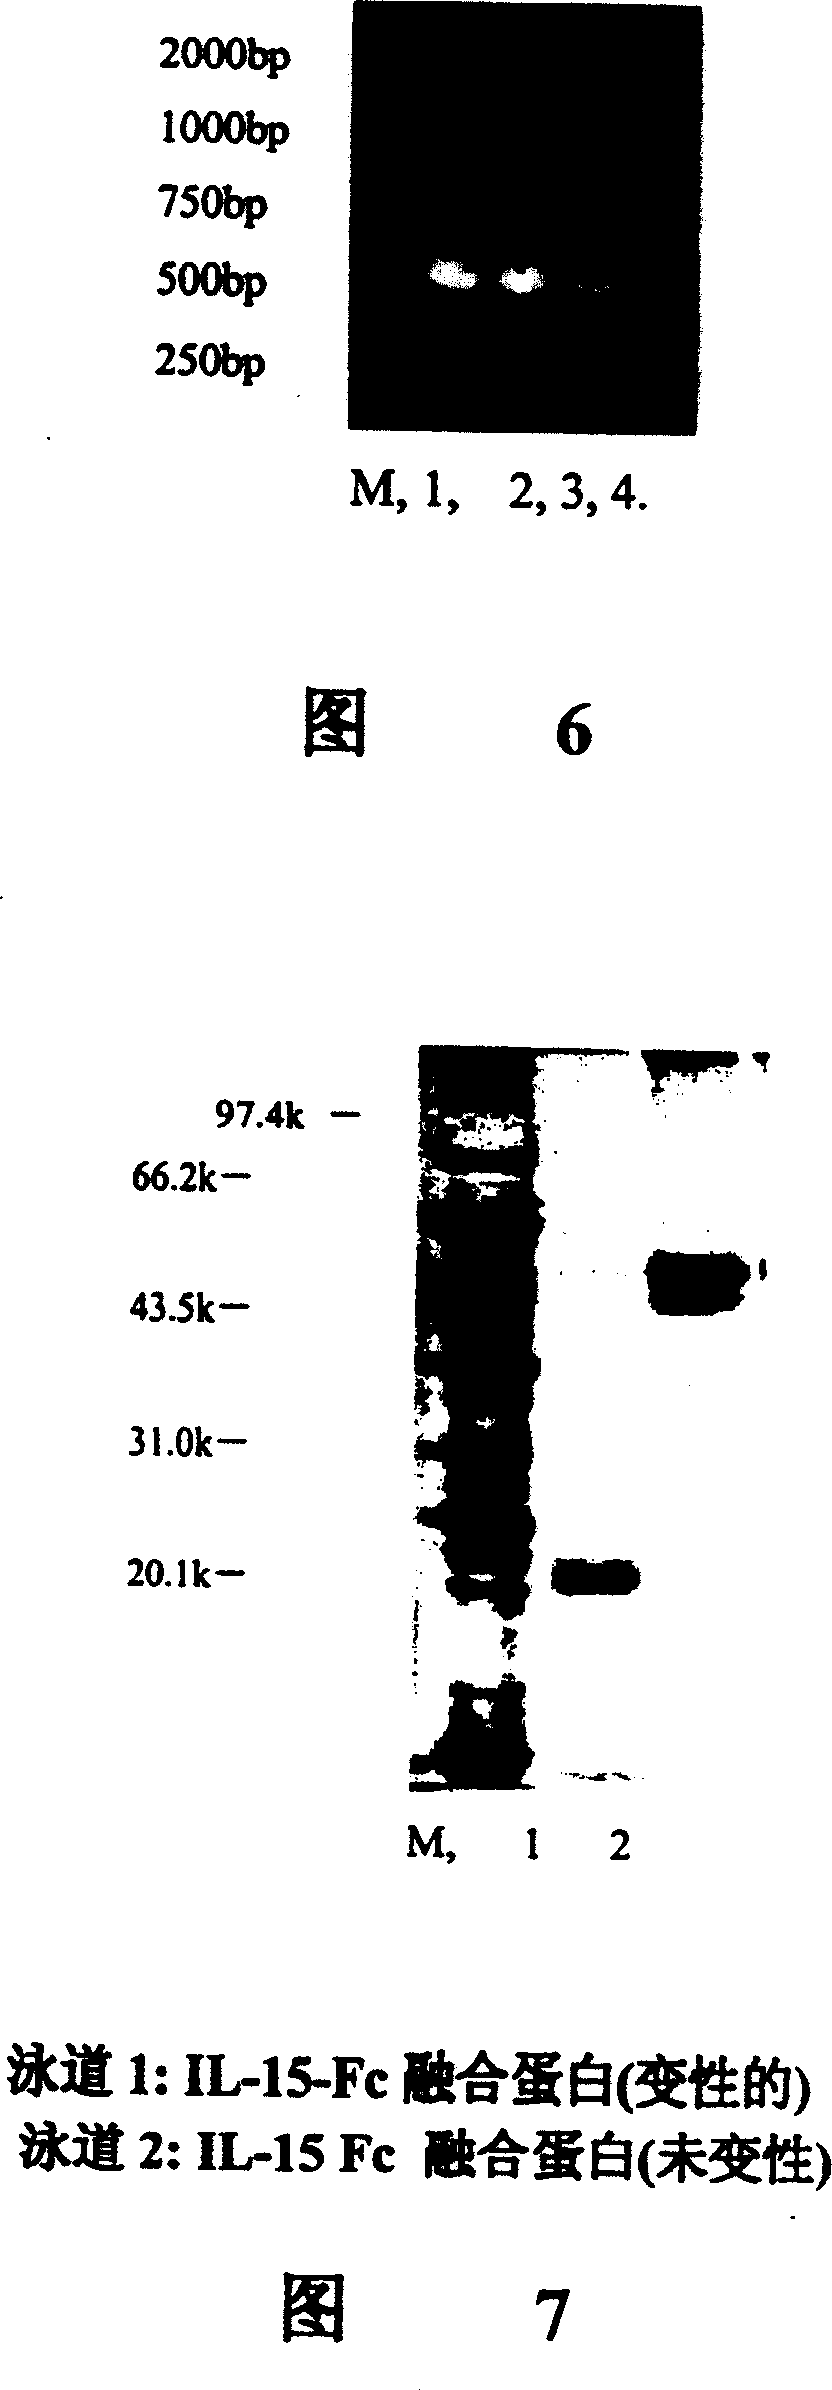 Interfusion protein of human interleukin 15 and Fe